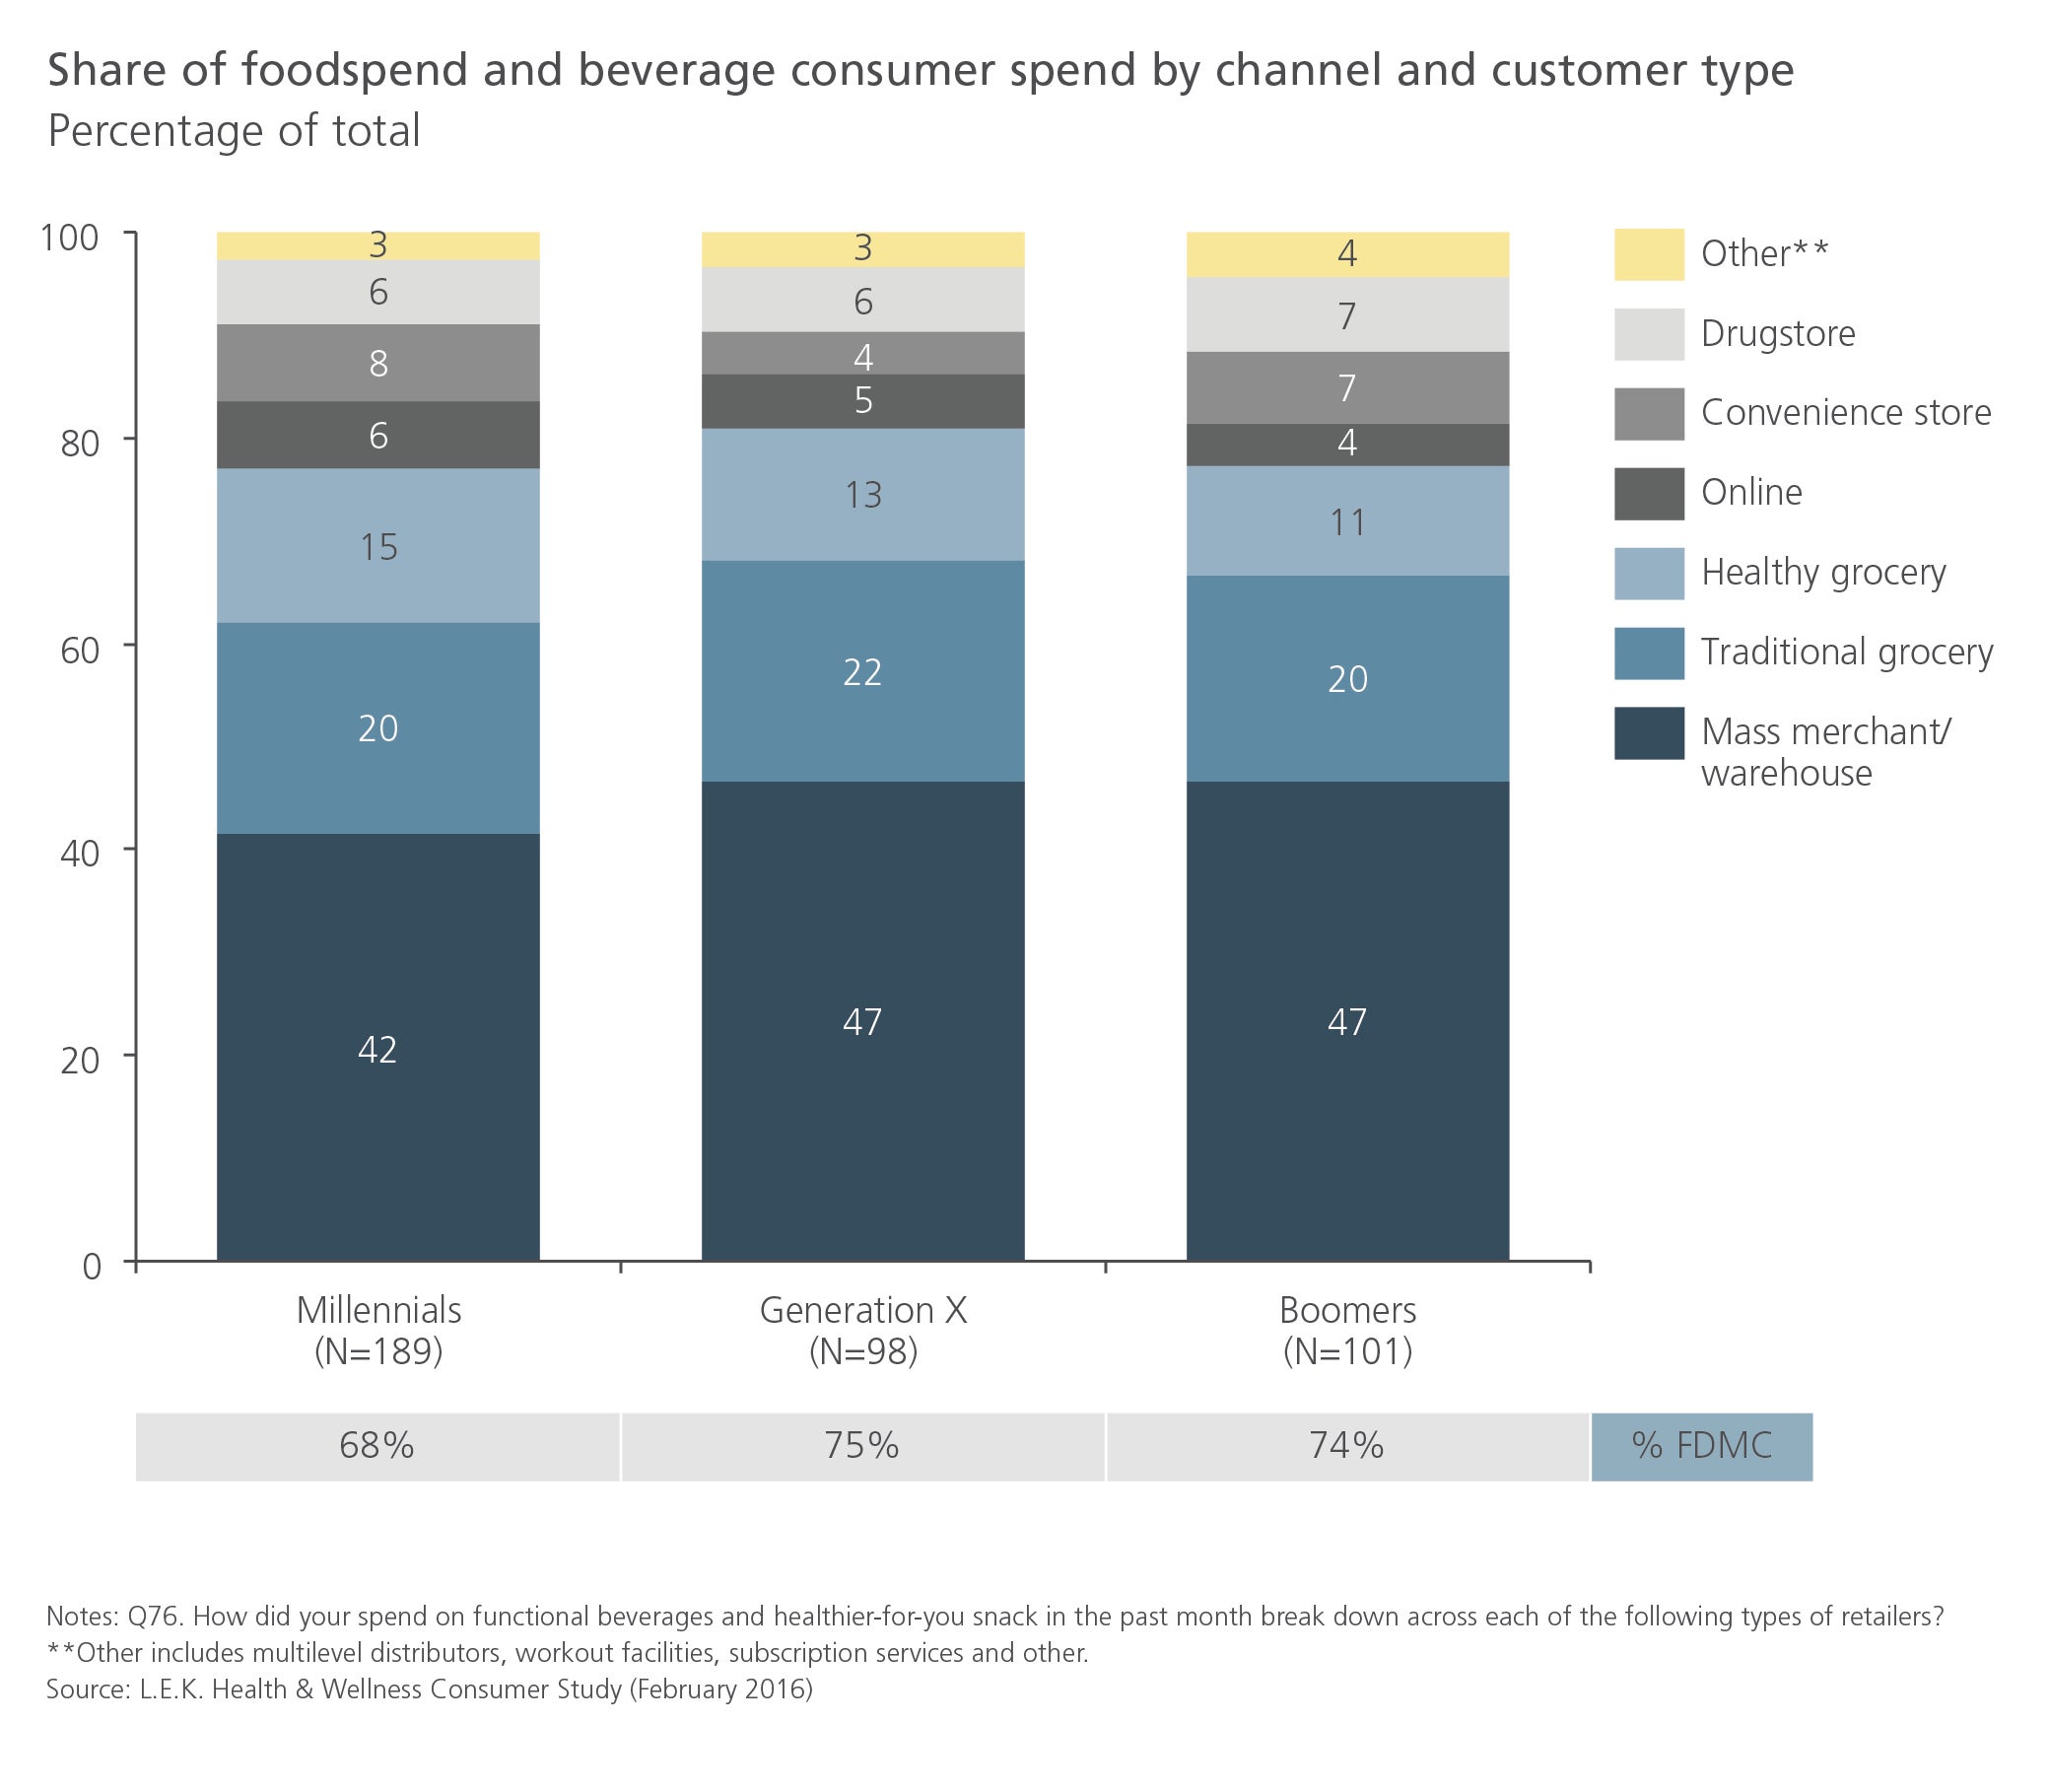 Share of foodspend and beverage consumer spend by channel and customer type